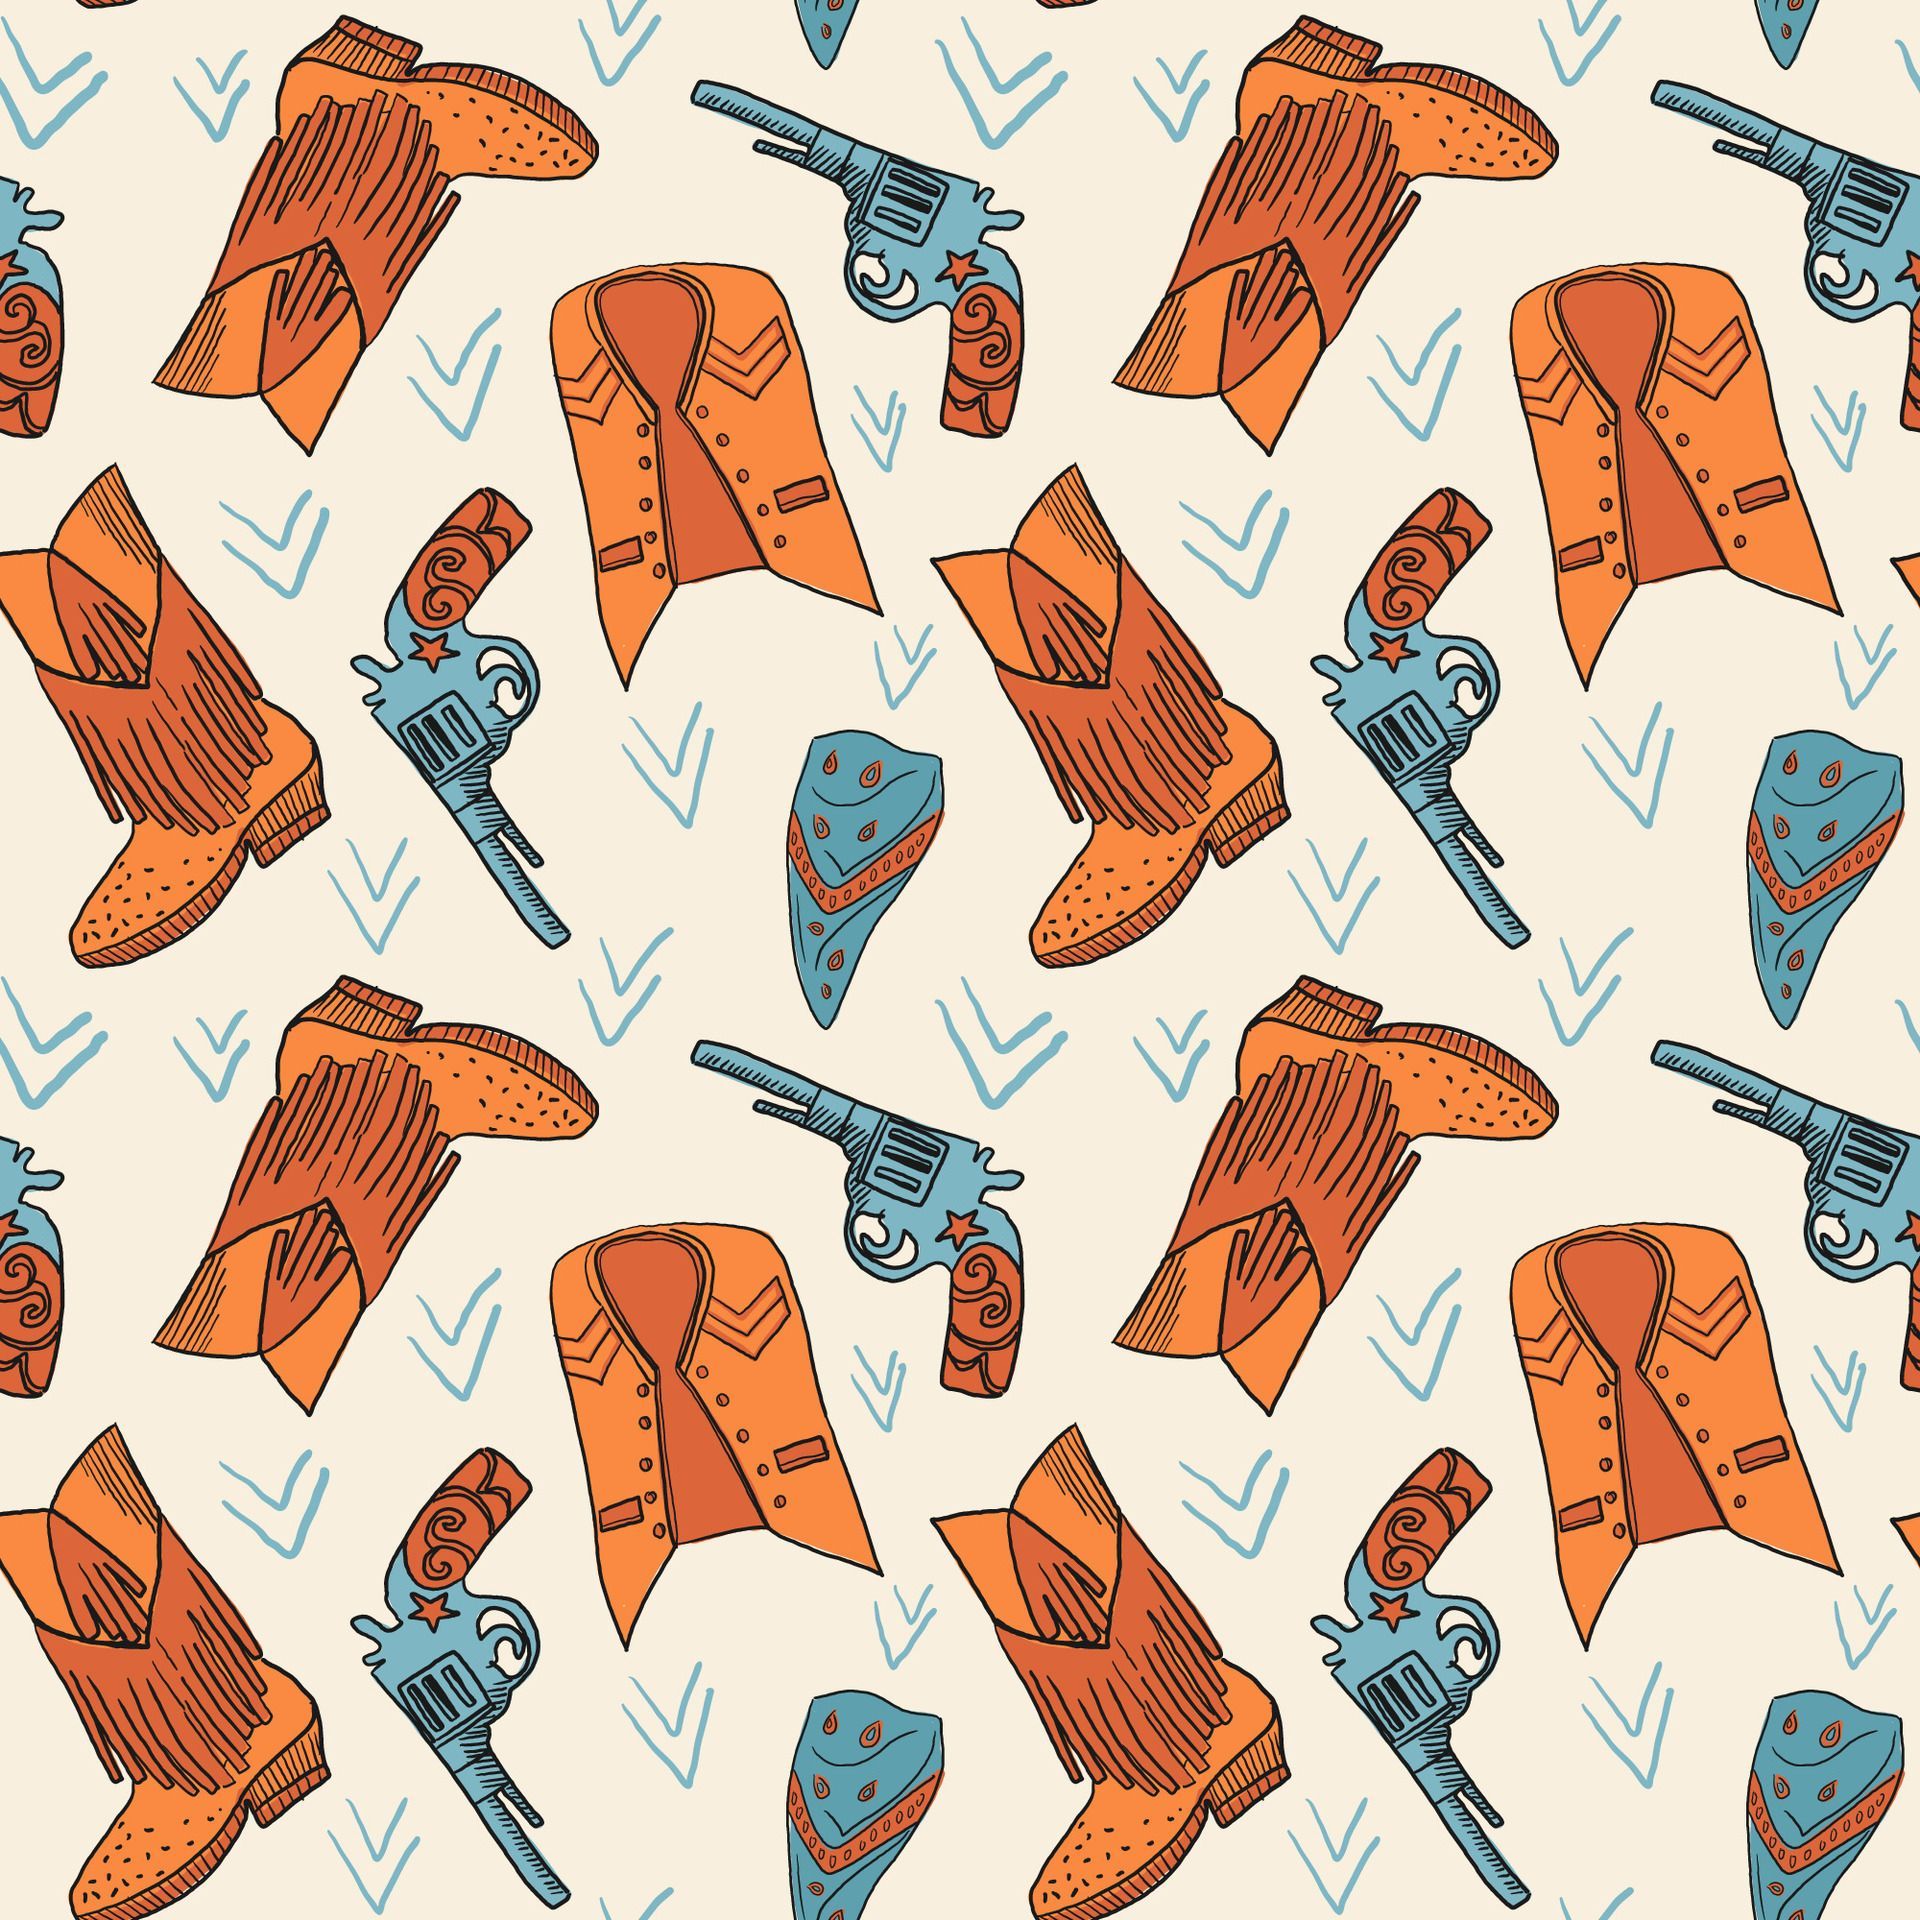 Cowgirl western theme, wild west concept seamless pattern. Home decor, Textile design, Wrapping paper, Stationery, Scrapbooking, Digital wallpaper, Website background. Vector illustration